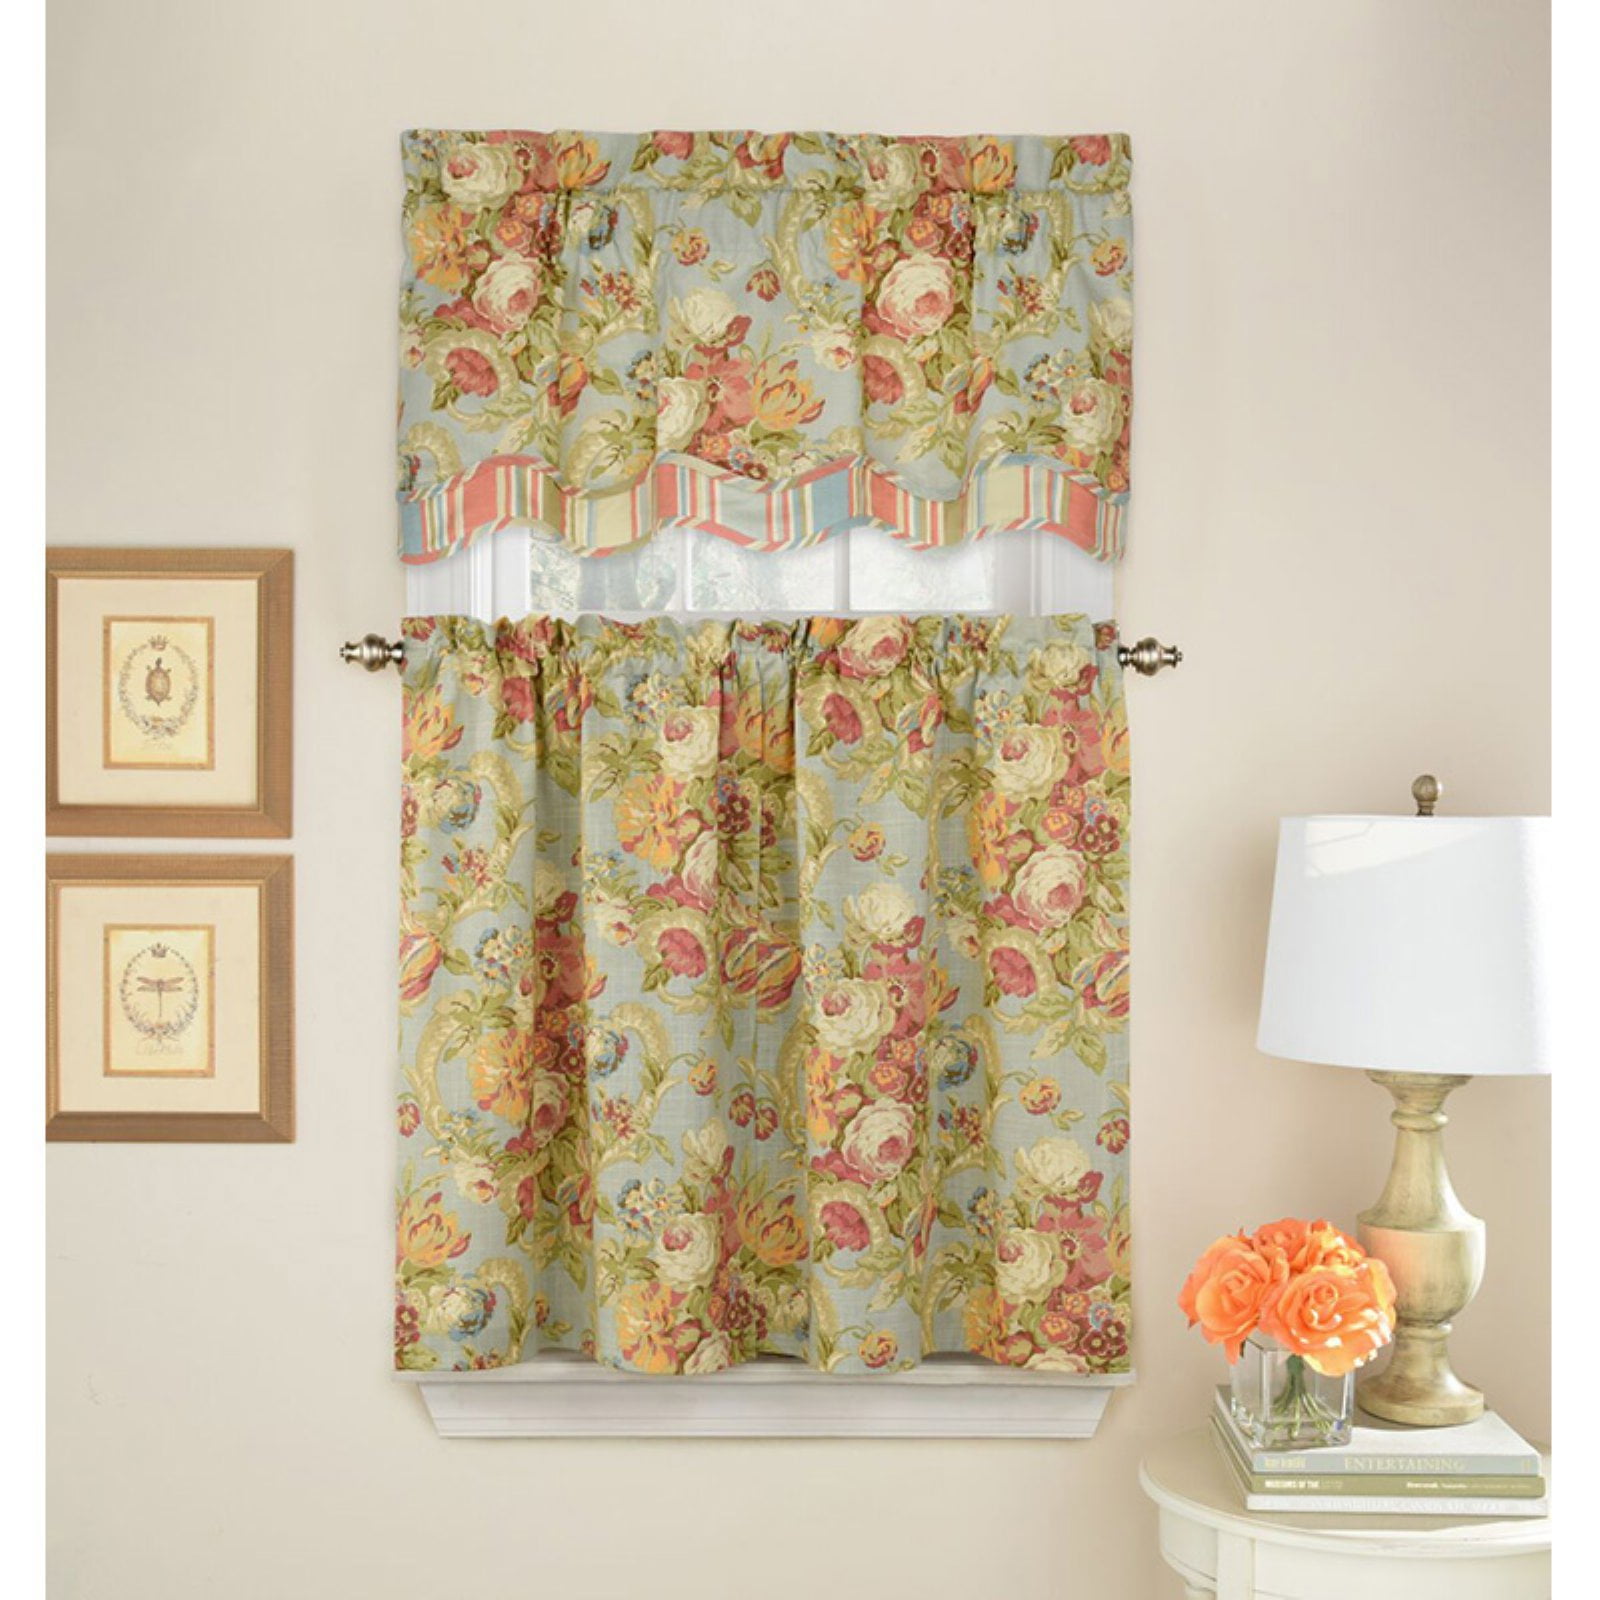 WAVERLY Spring Bling Window Treatment Scallop Valance Floral Curtain 18x52 